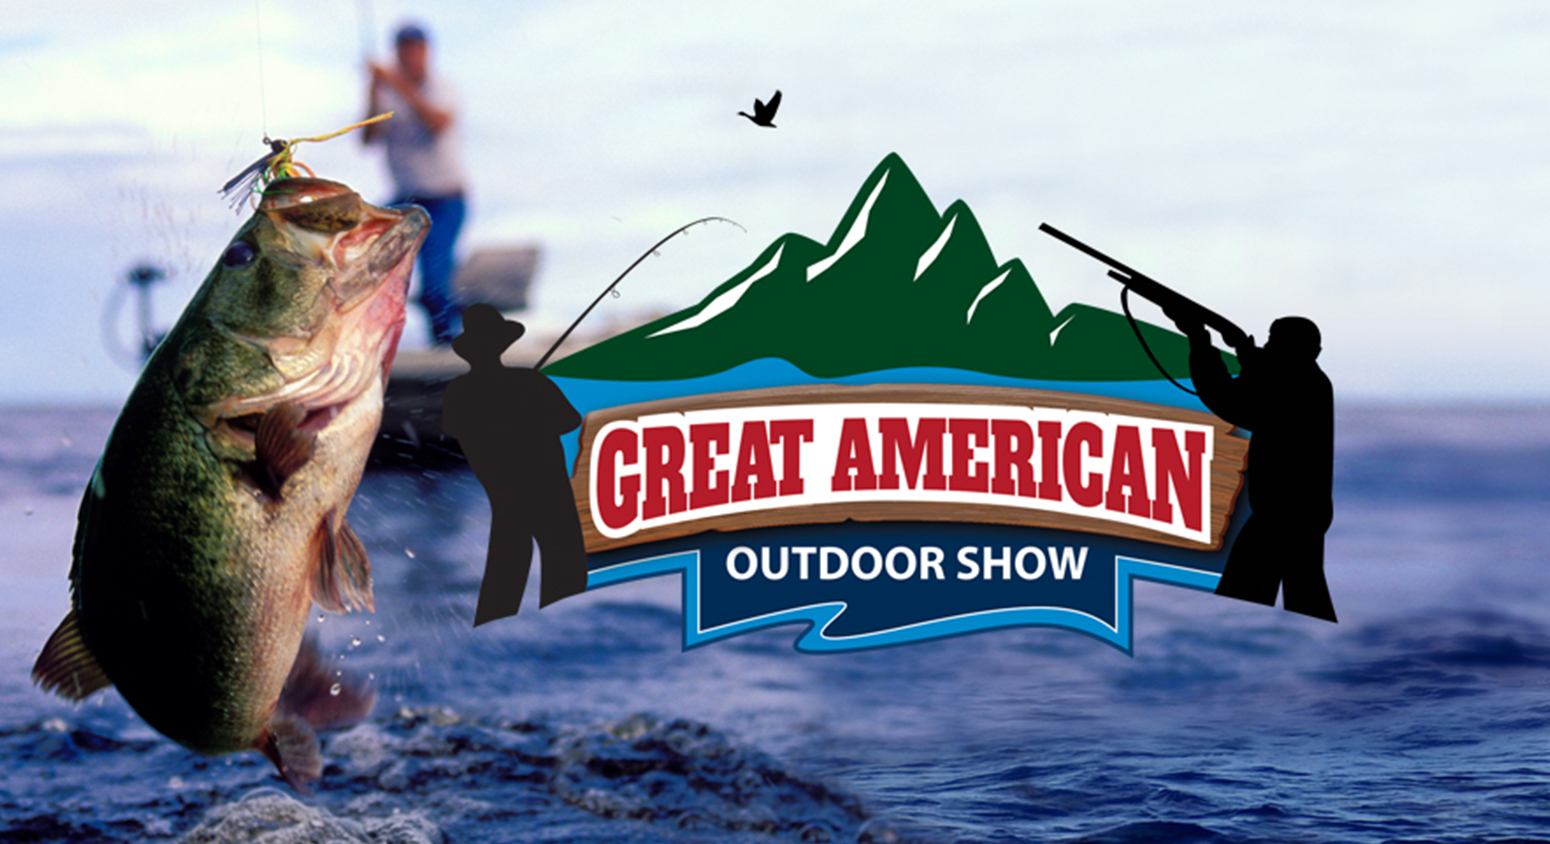 Great American Outdoor Show Events: Monday, February 8th